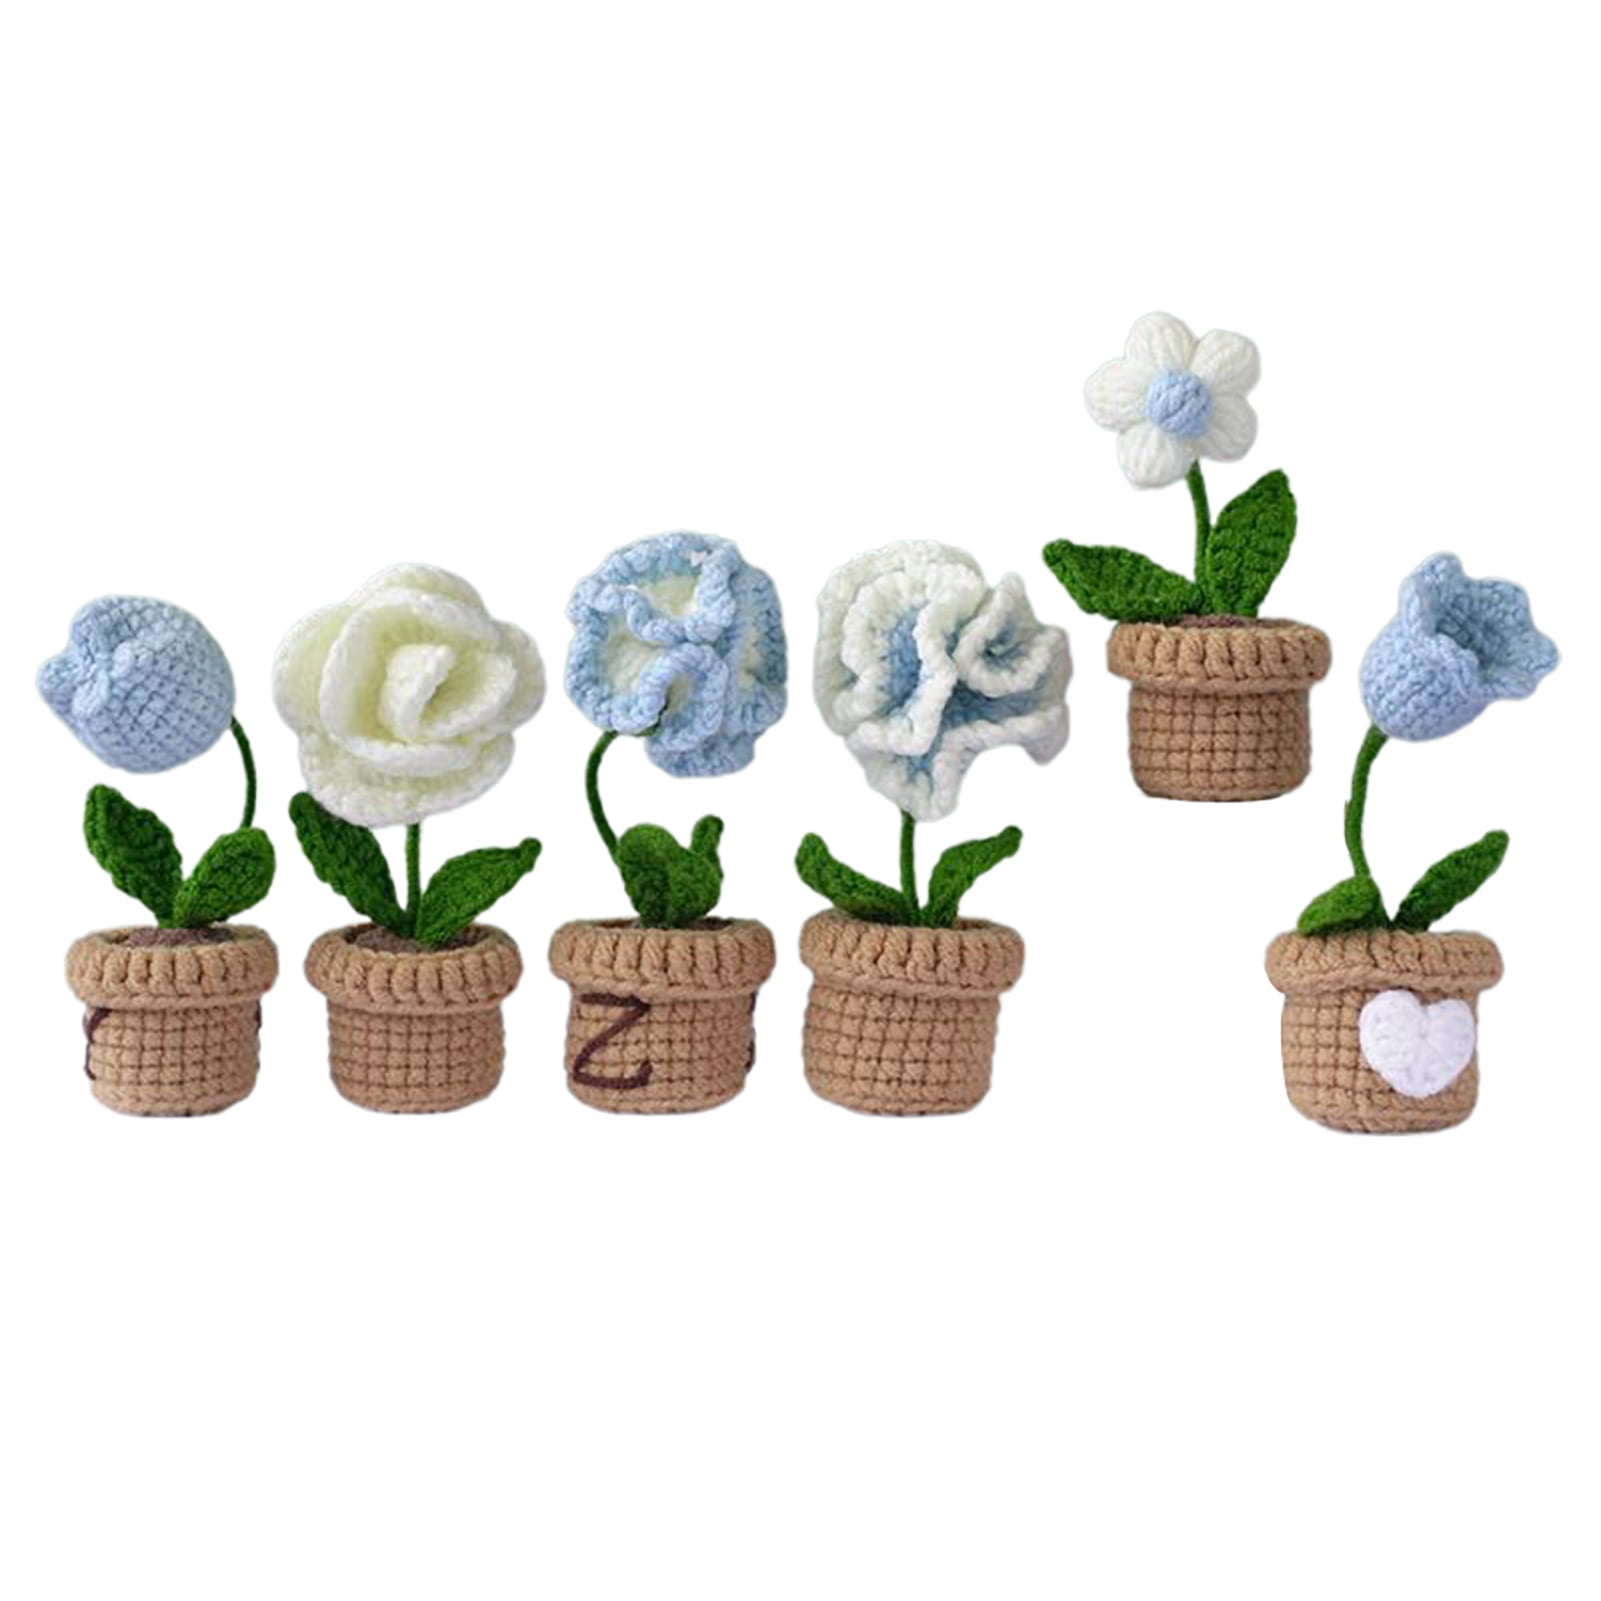 Mewaii® Crochet Kit Flowers and Potted Plants with Easy Peasy Yarn